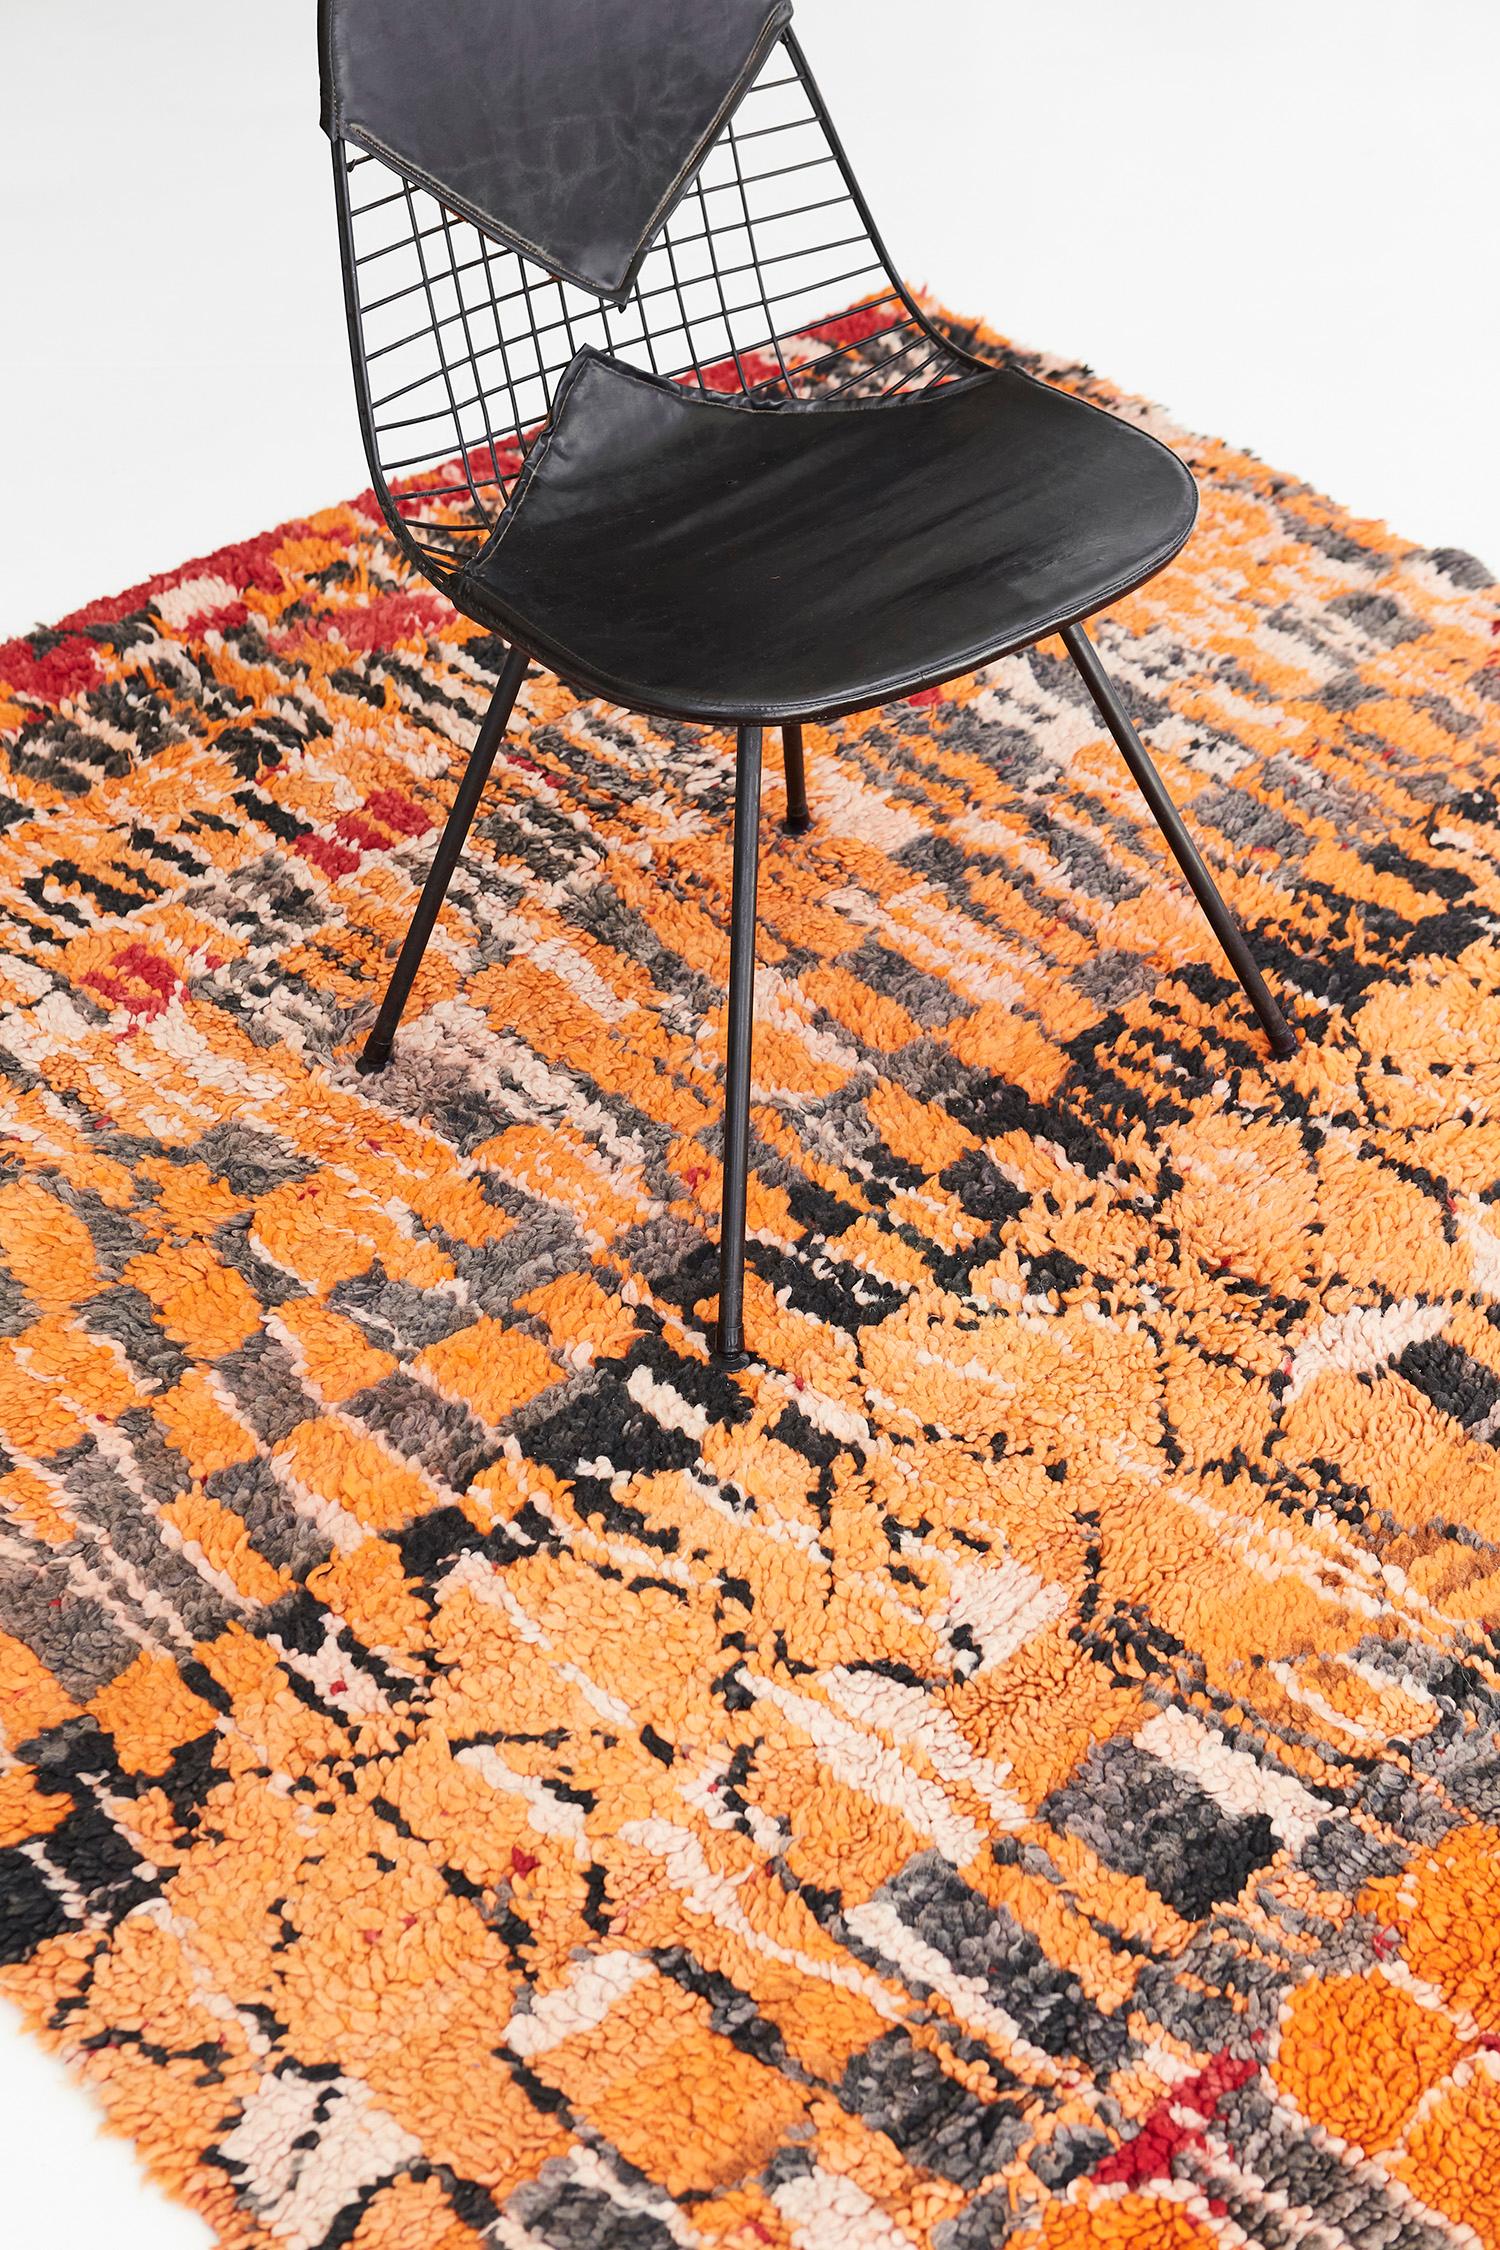 This magnificent rug has asymmetrical elements forming a pattern that perfectly resembles modern cubism. The featured shades of tangerine, charcoal, and ivory in this vintage rug complement each other and allow the well-defined elements to create